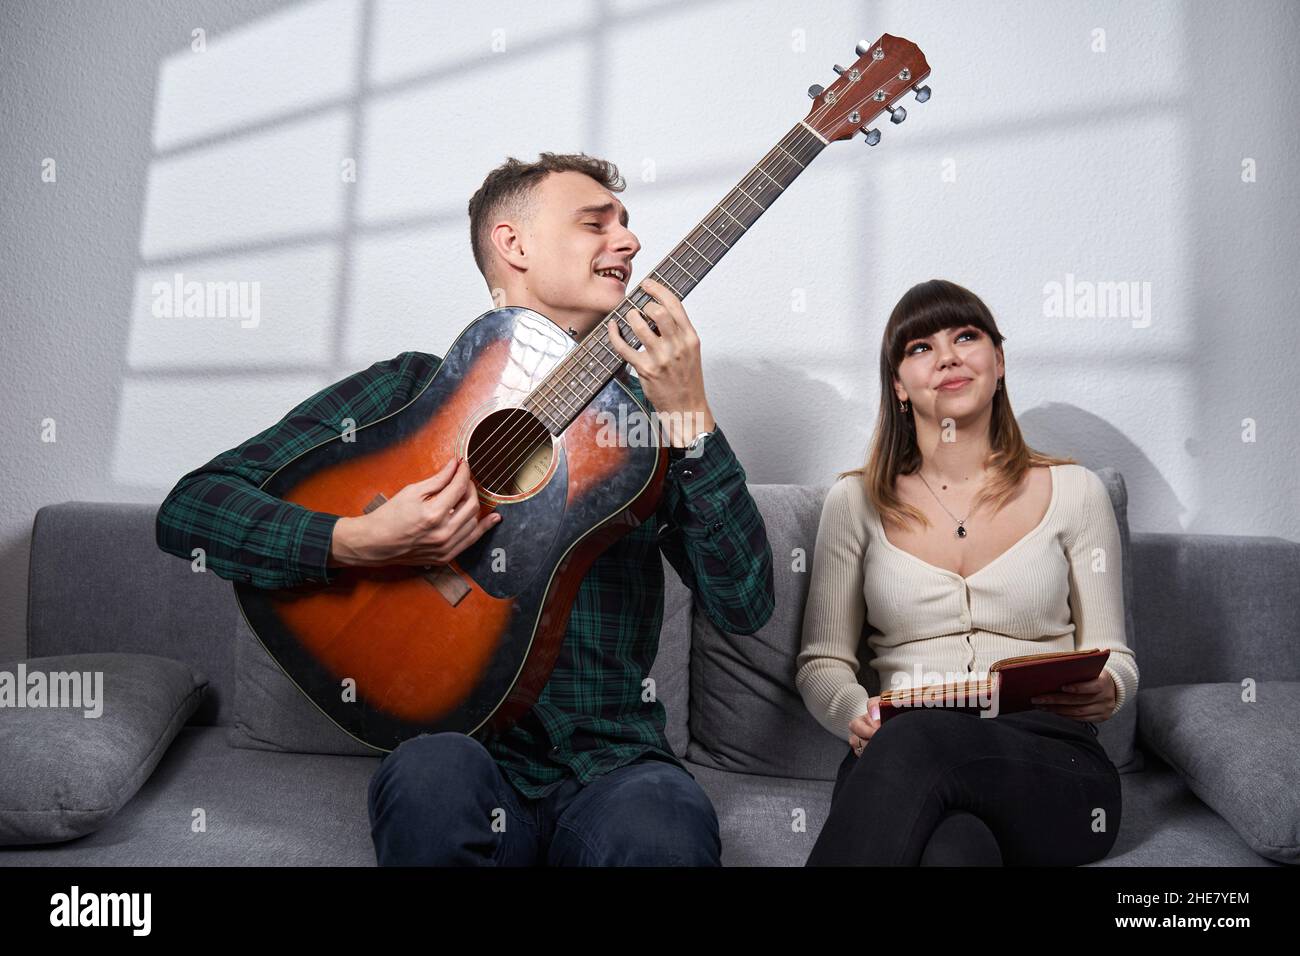 Couple having a great time, young man is playing guitar while the girl is annoyed by loudness, trying to read a book Stock Photo